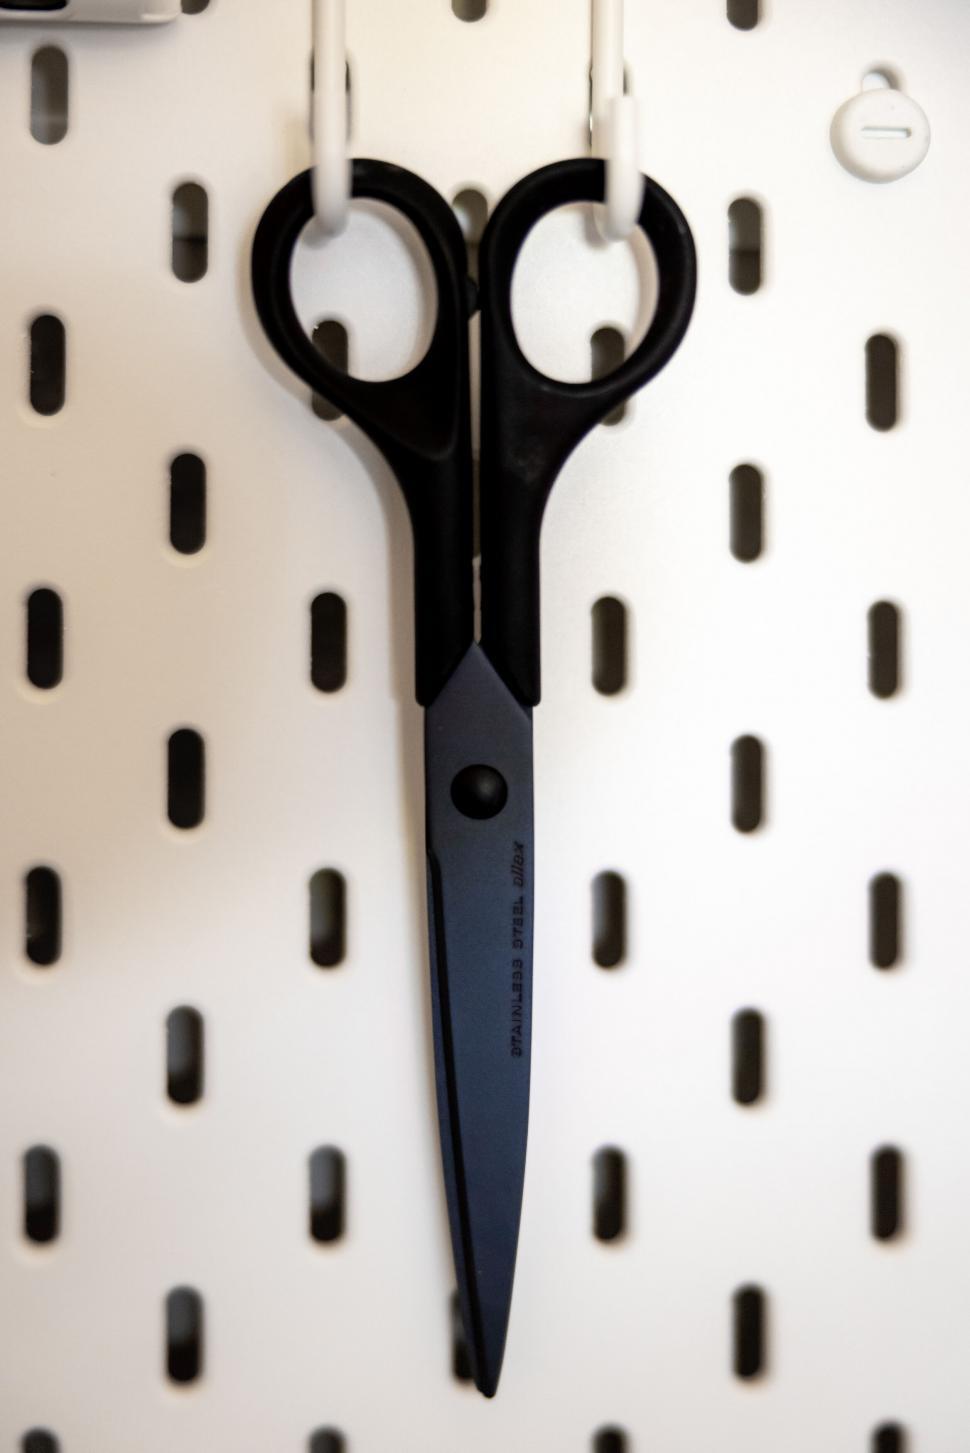 Free Image of Scissors hanging on a pegboard in a workshop 